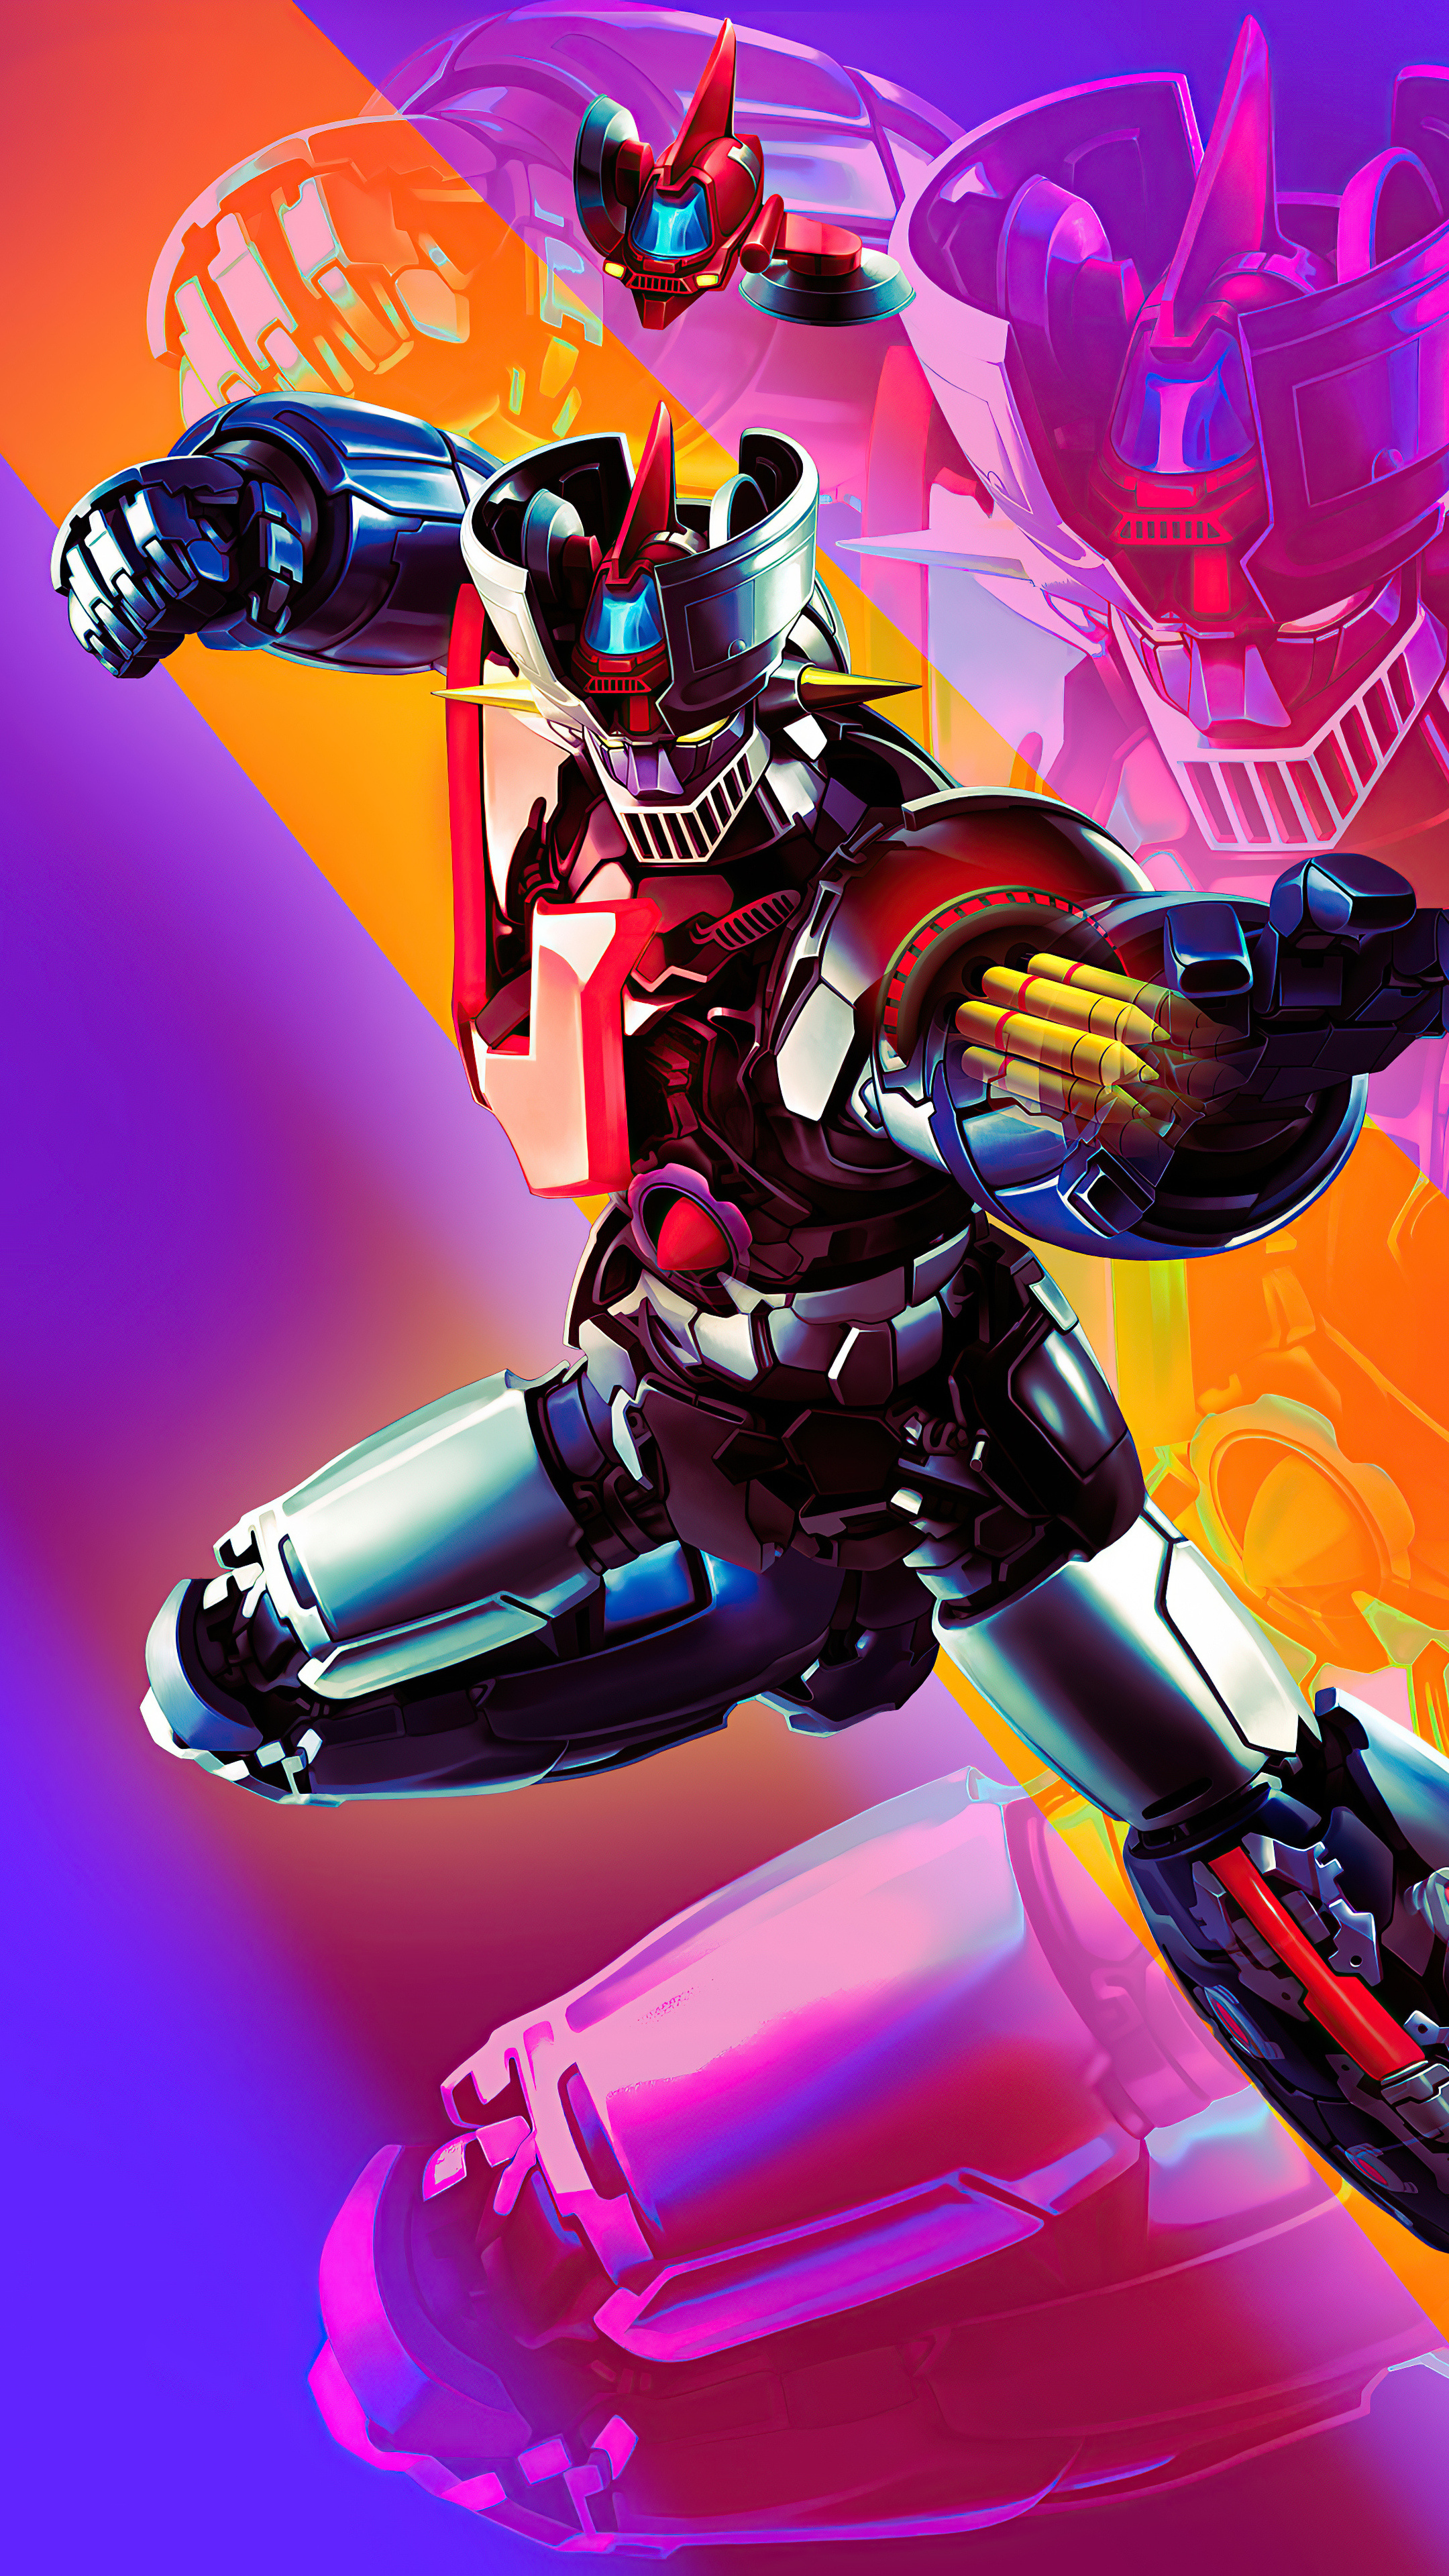 Mazinger Z Infinity wallpapers, Sony Xperia devices, High-definition visuals, Home screen customization, 2160x3840 4K Phone